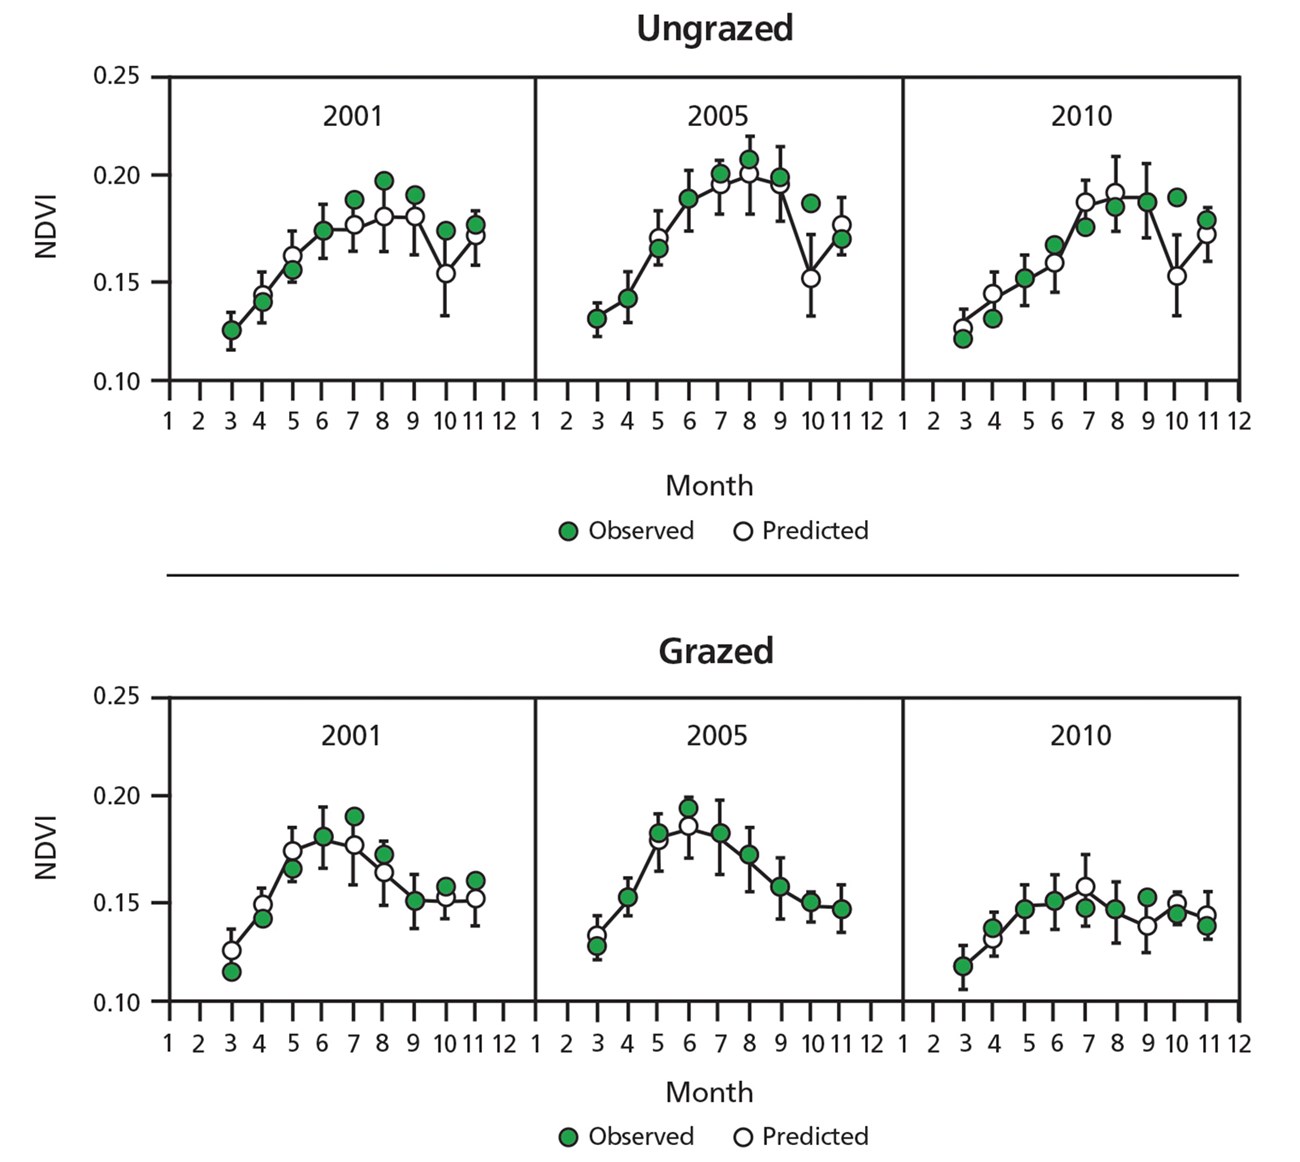 Figure showing monthly observed and predicted NDVI levels for 2001, 2005, and 2010.